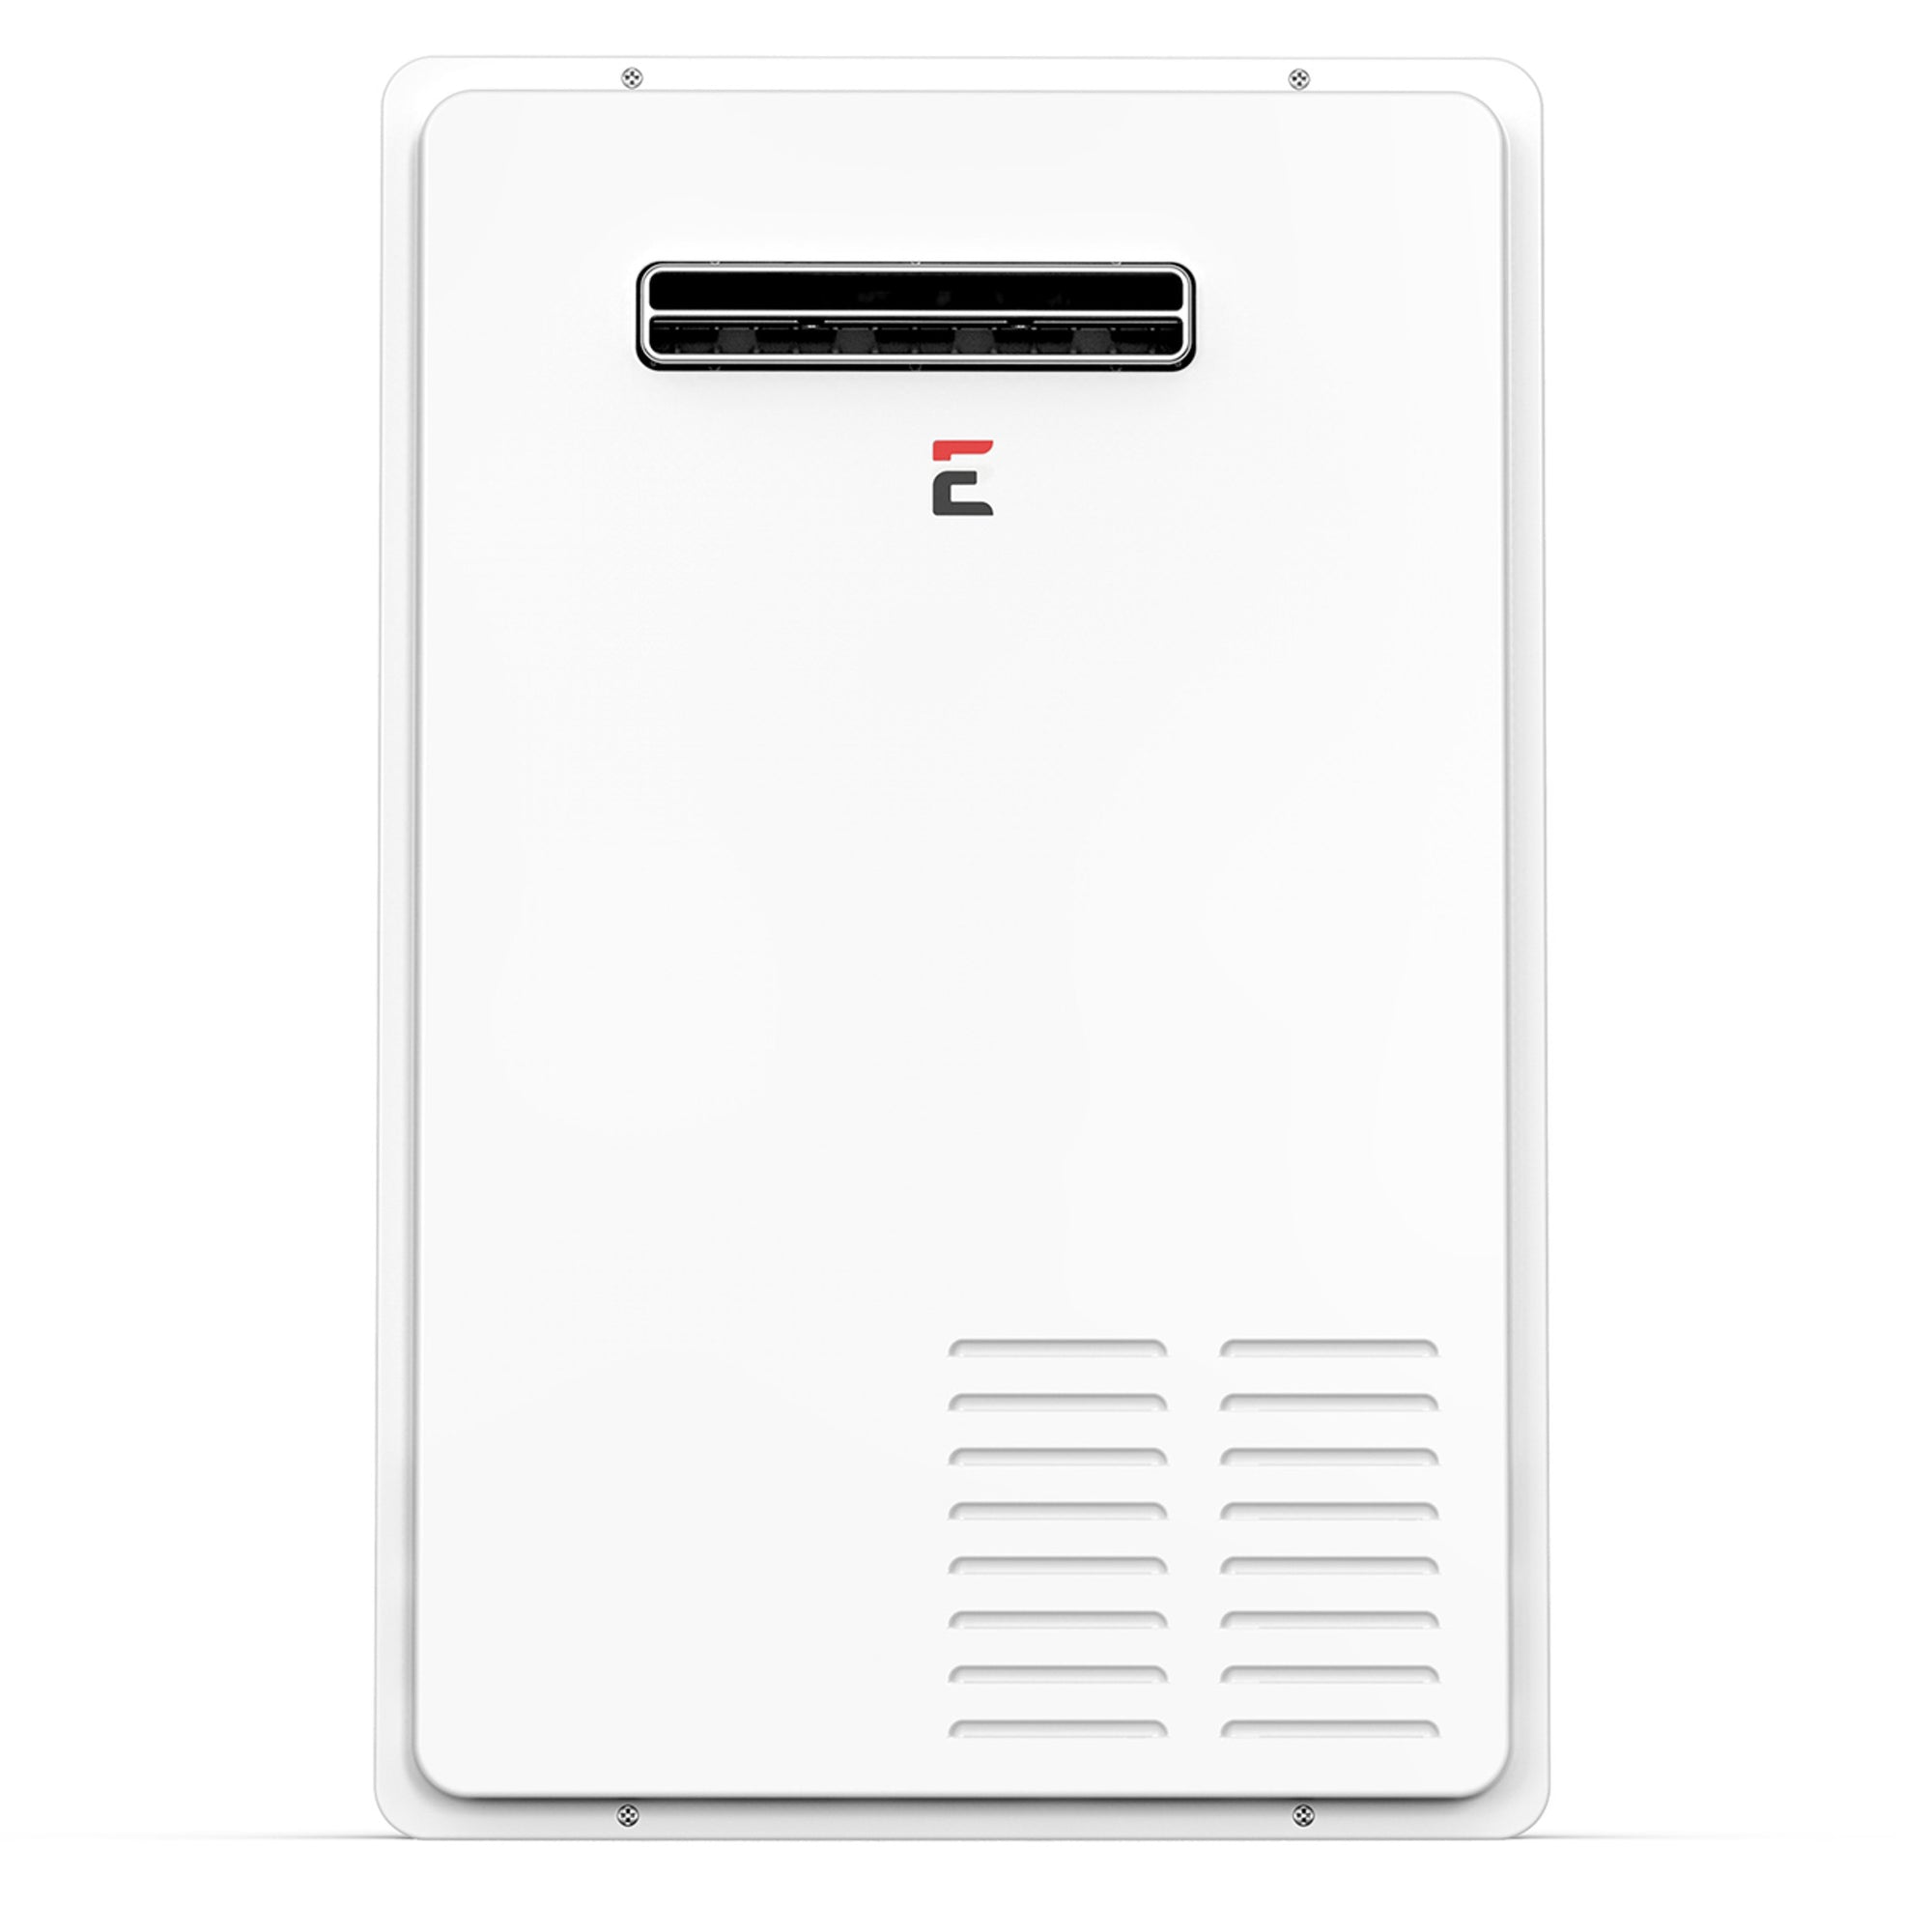 Eccotemp Builder Series 7.0 GPM Outdoor Tankless Water Heater